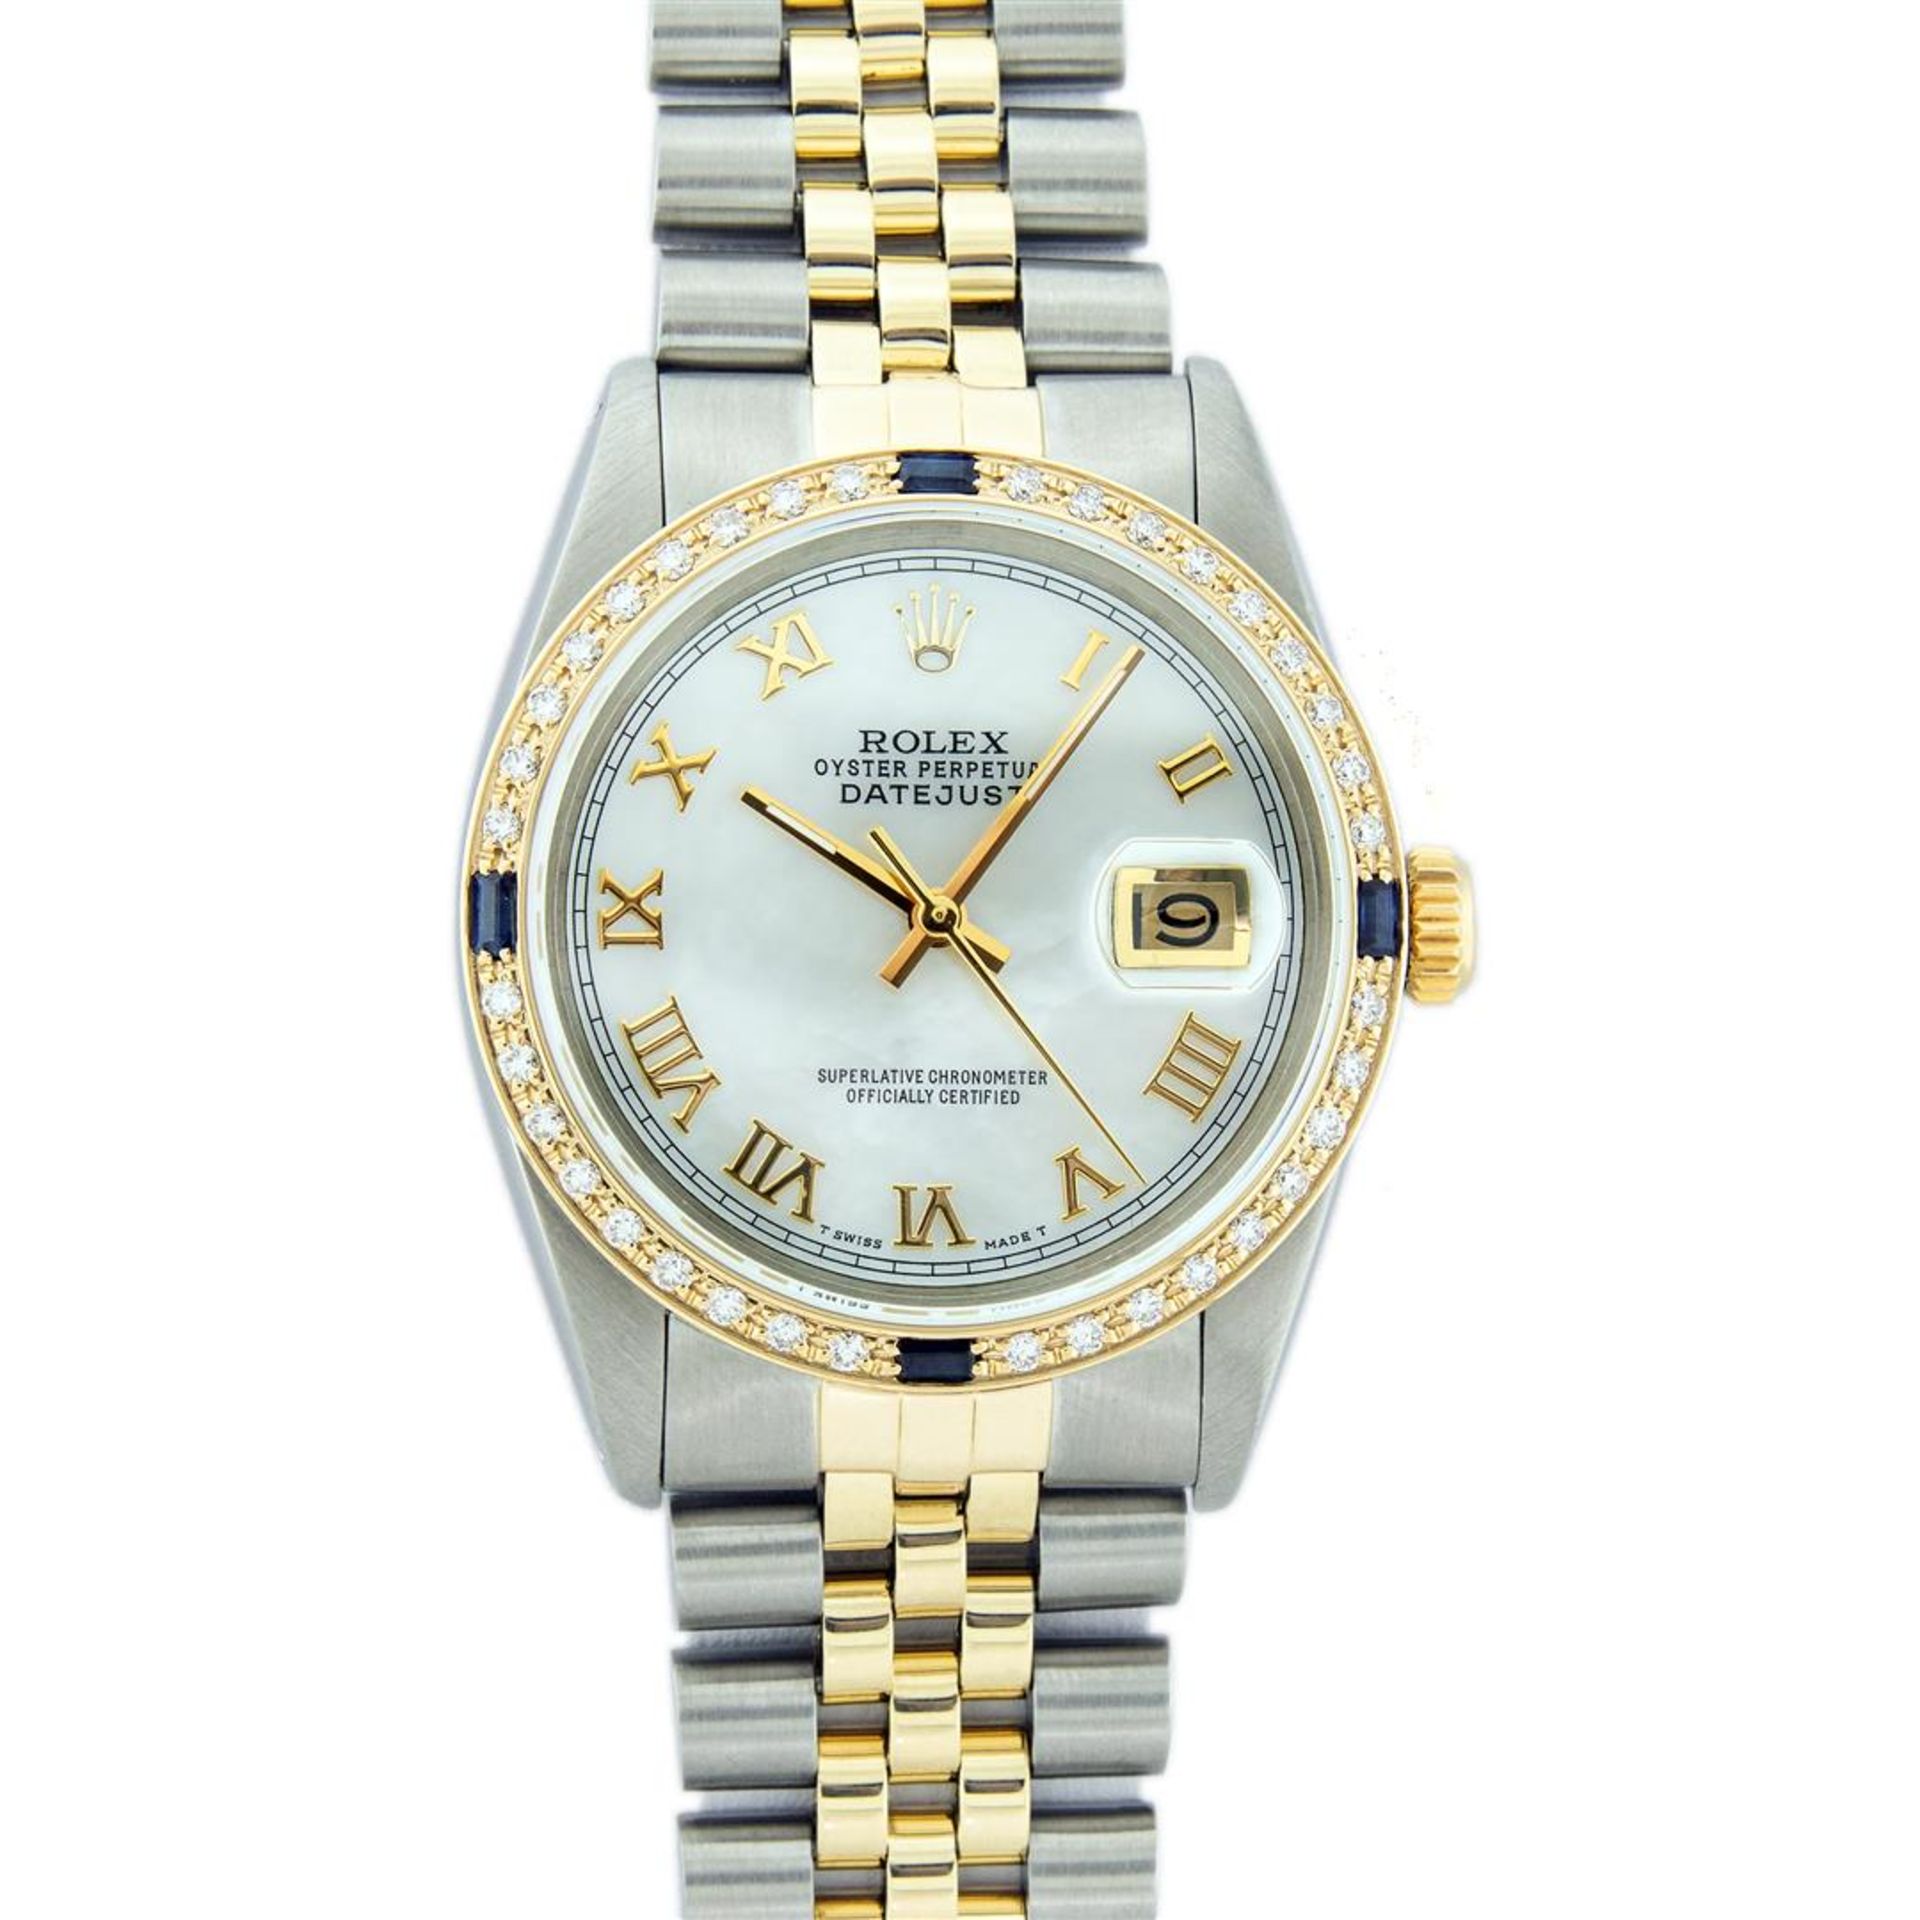 Rolex Mens 2 Tone Mother Of Pearl Diamond & Sapphire 36MM Datejust Wristwatch - Image 2 of 9